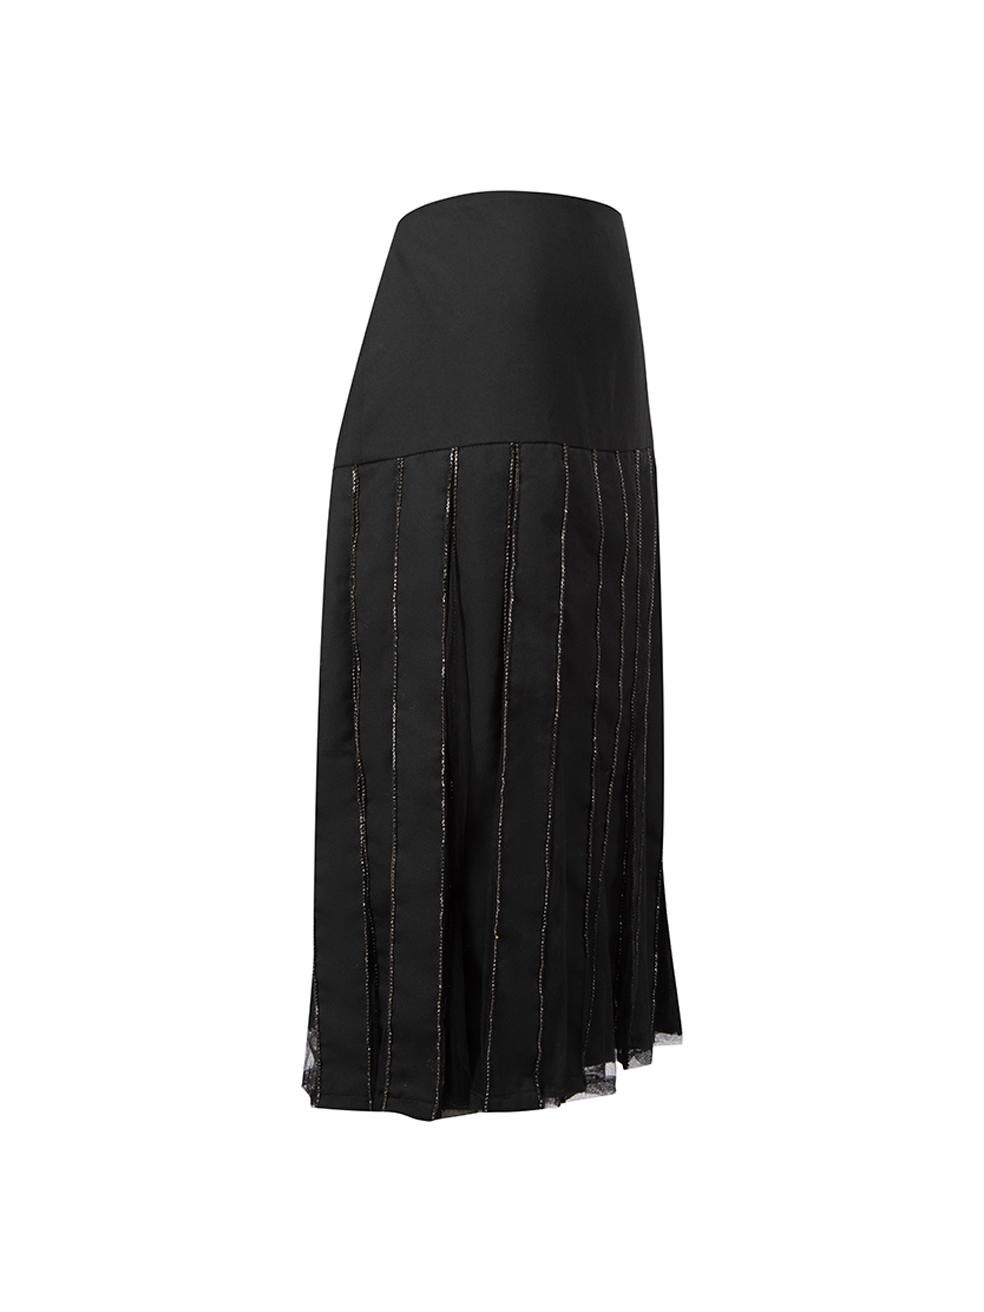 CONDITION is Very good. Hardly any visible wear to skirt is evident on this used Sanne designer sample item. Please note that this item does not have brand label.
 
 Details
  Designer sample item
 Black
 Synthetic
 Knee length skirt
 Pleated and